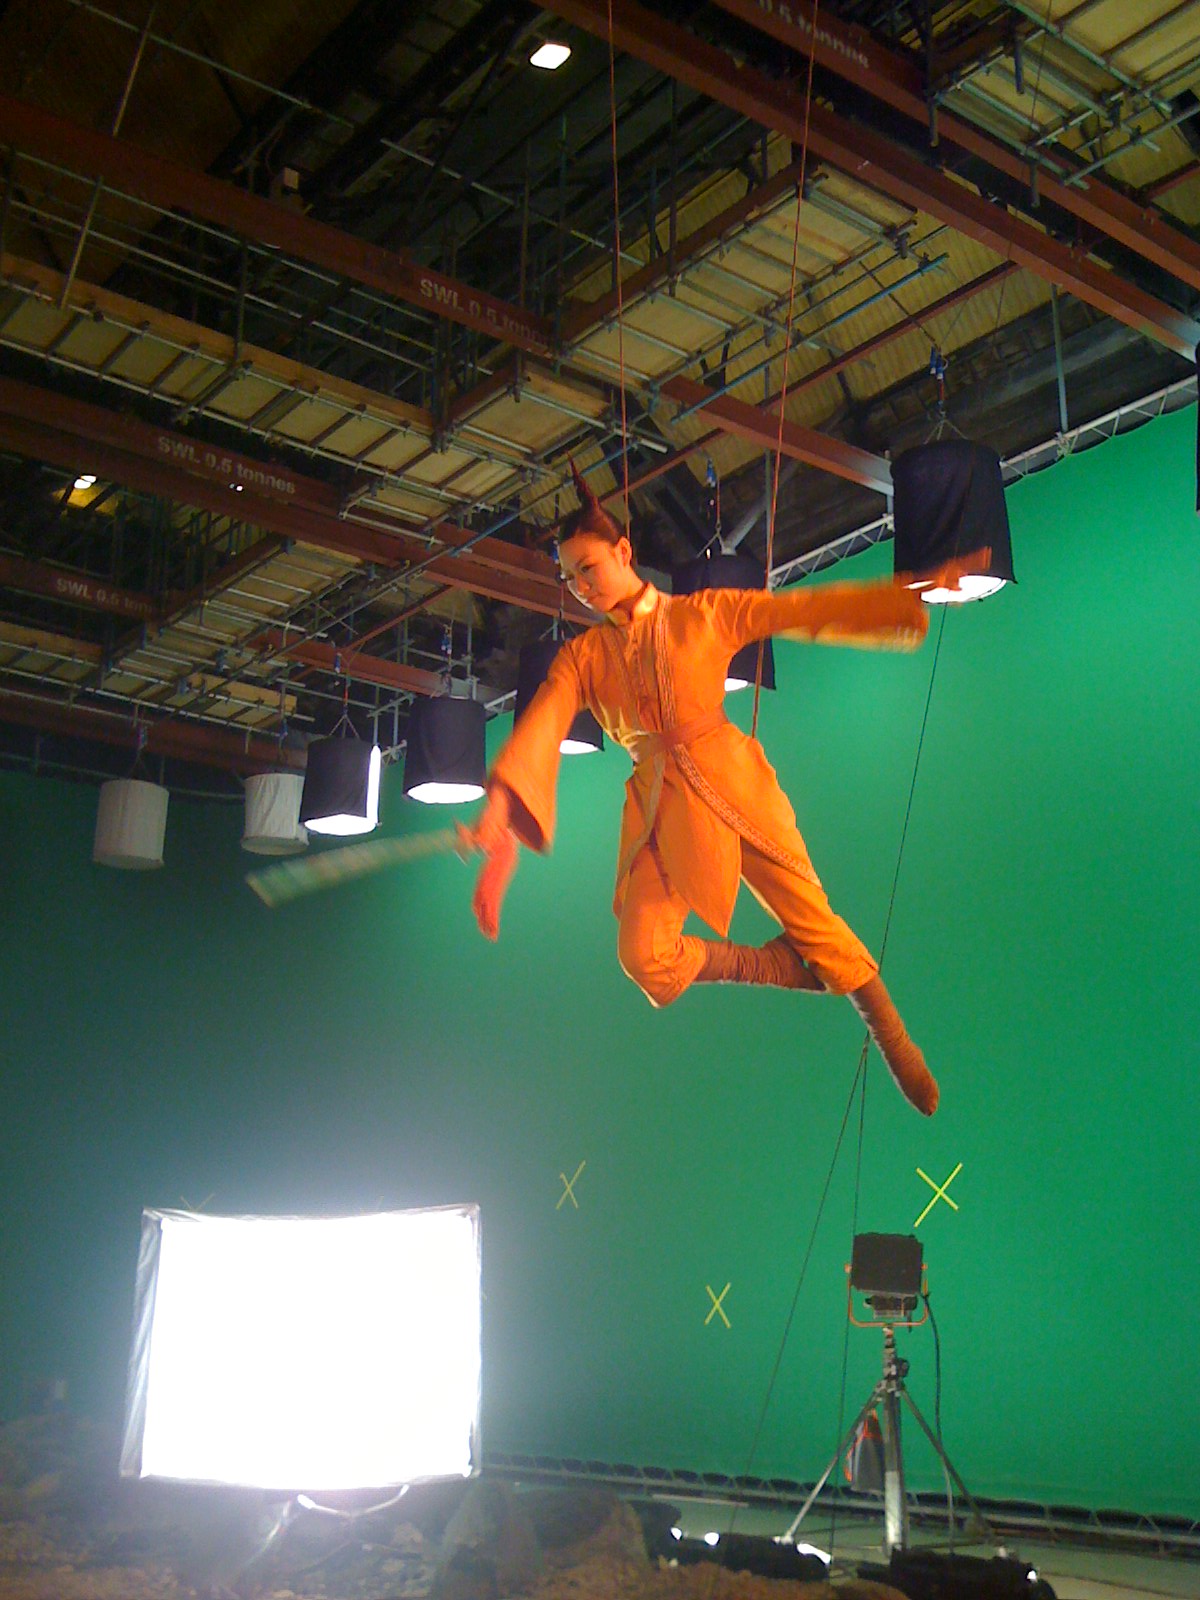 Robin Earle managing director provides the stunt rigging and performer flying for Jamie Hewlett's short film Monkey Bee